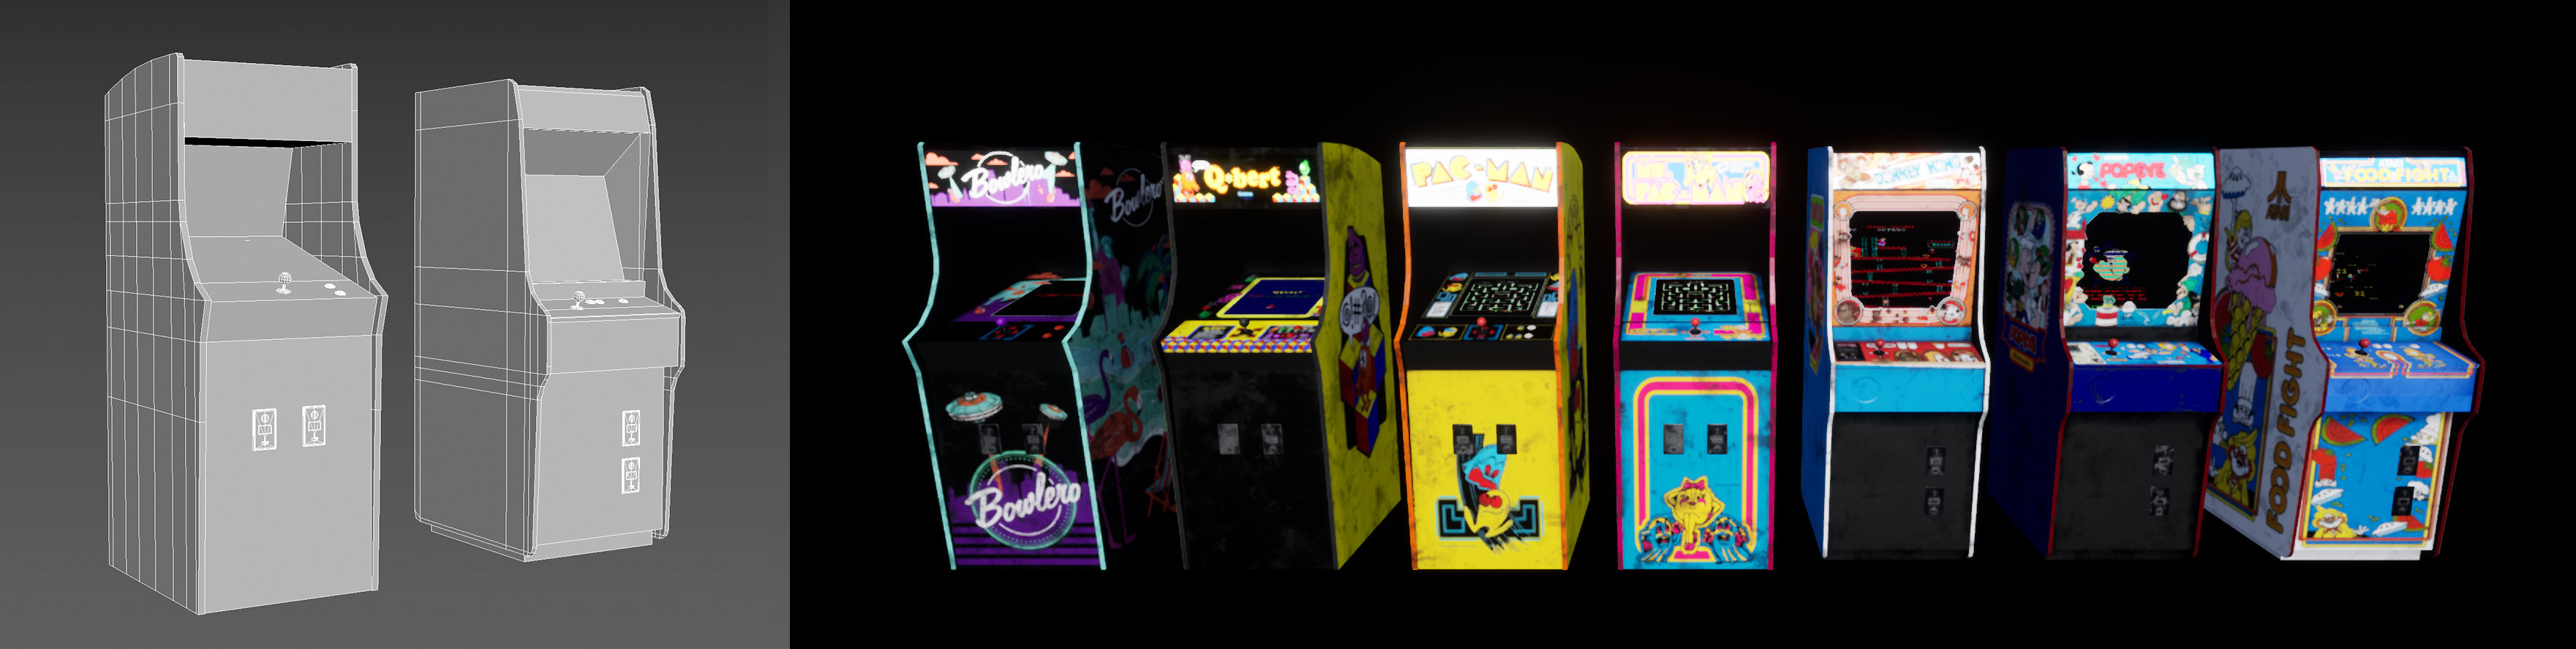 Arcades models wireframes and textures